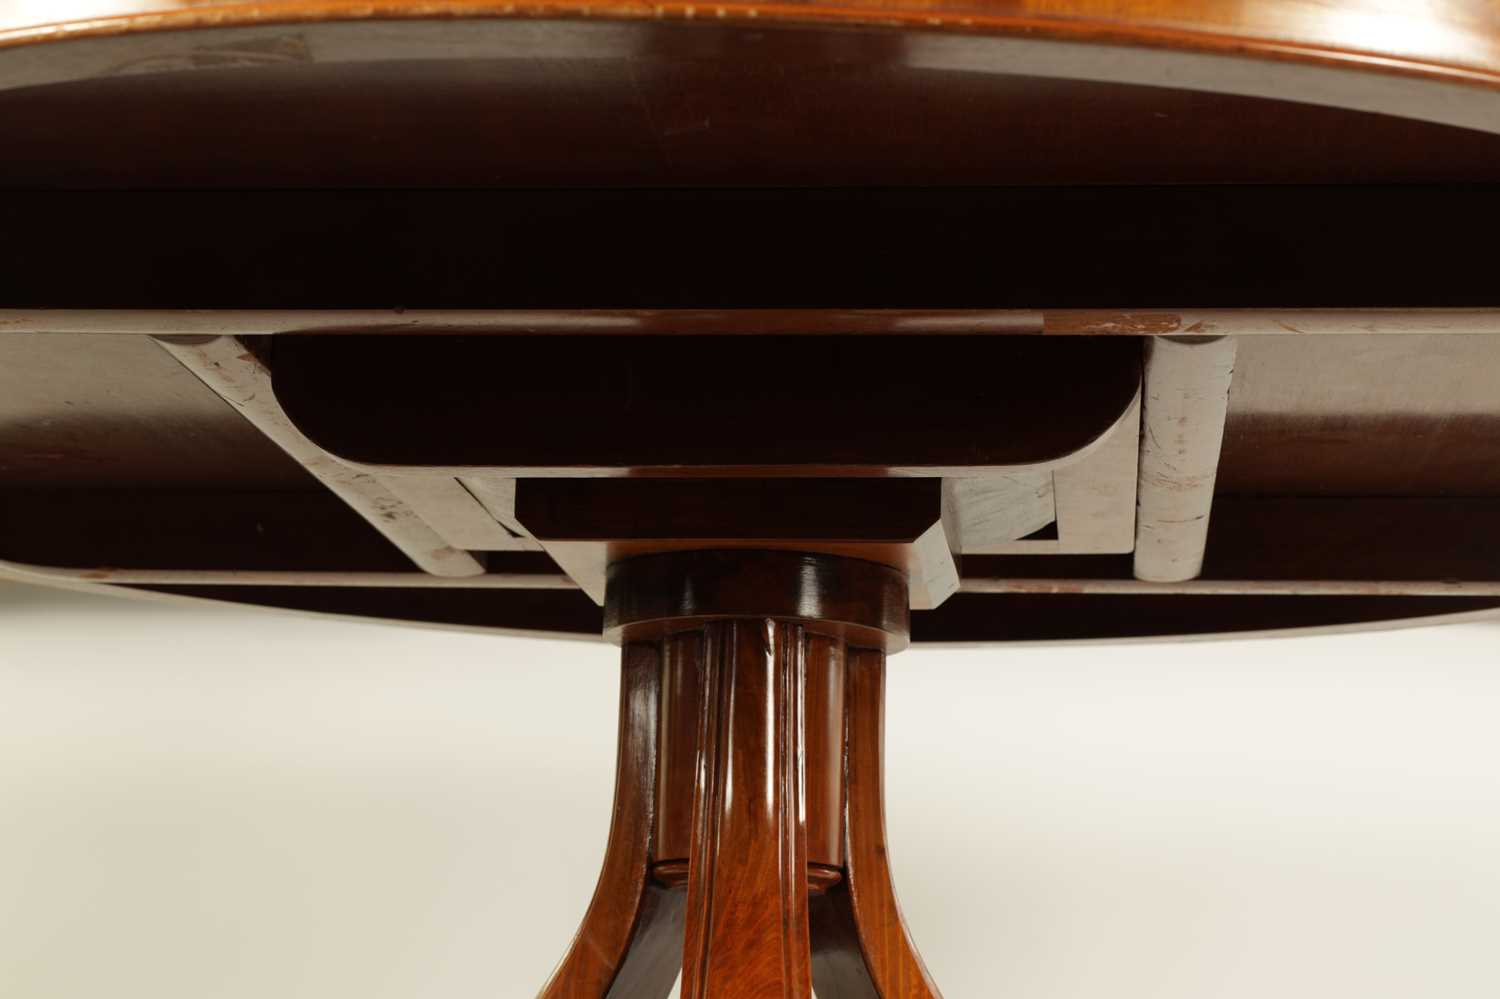 A FINE MID 19TH CENTURY FIGURED SATINWOOD MARQUETRY INLAID CENTRE TABLE - Image 6 of 8